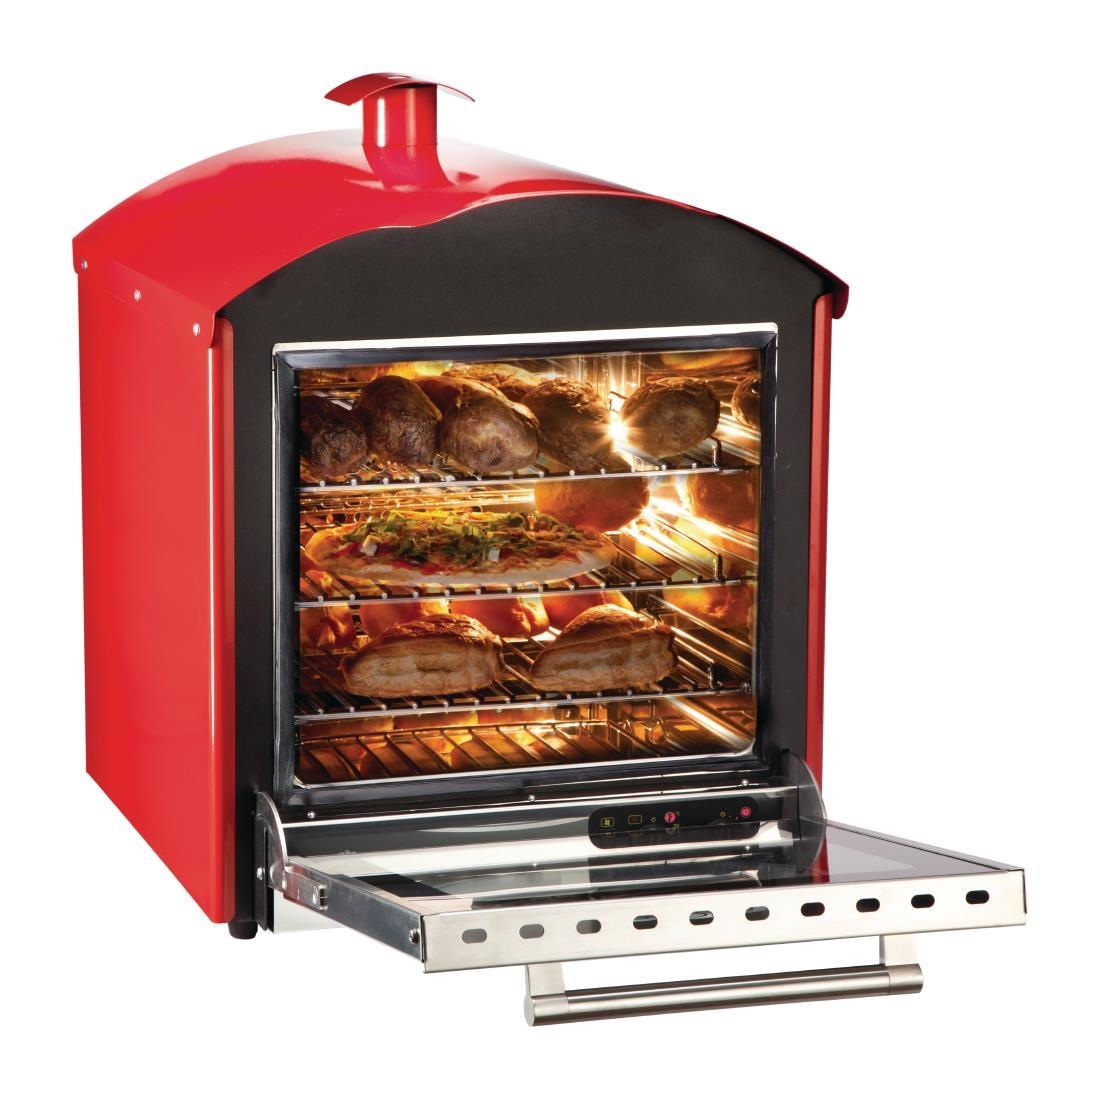 King Edward Bake King Solo Oven Red BKS-RED - HC121  - 2